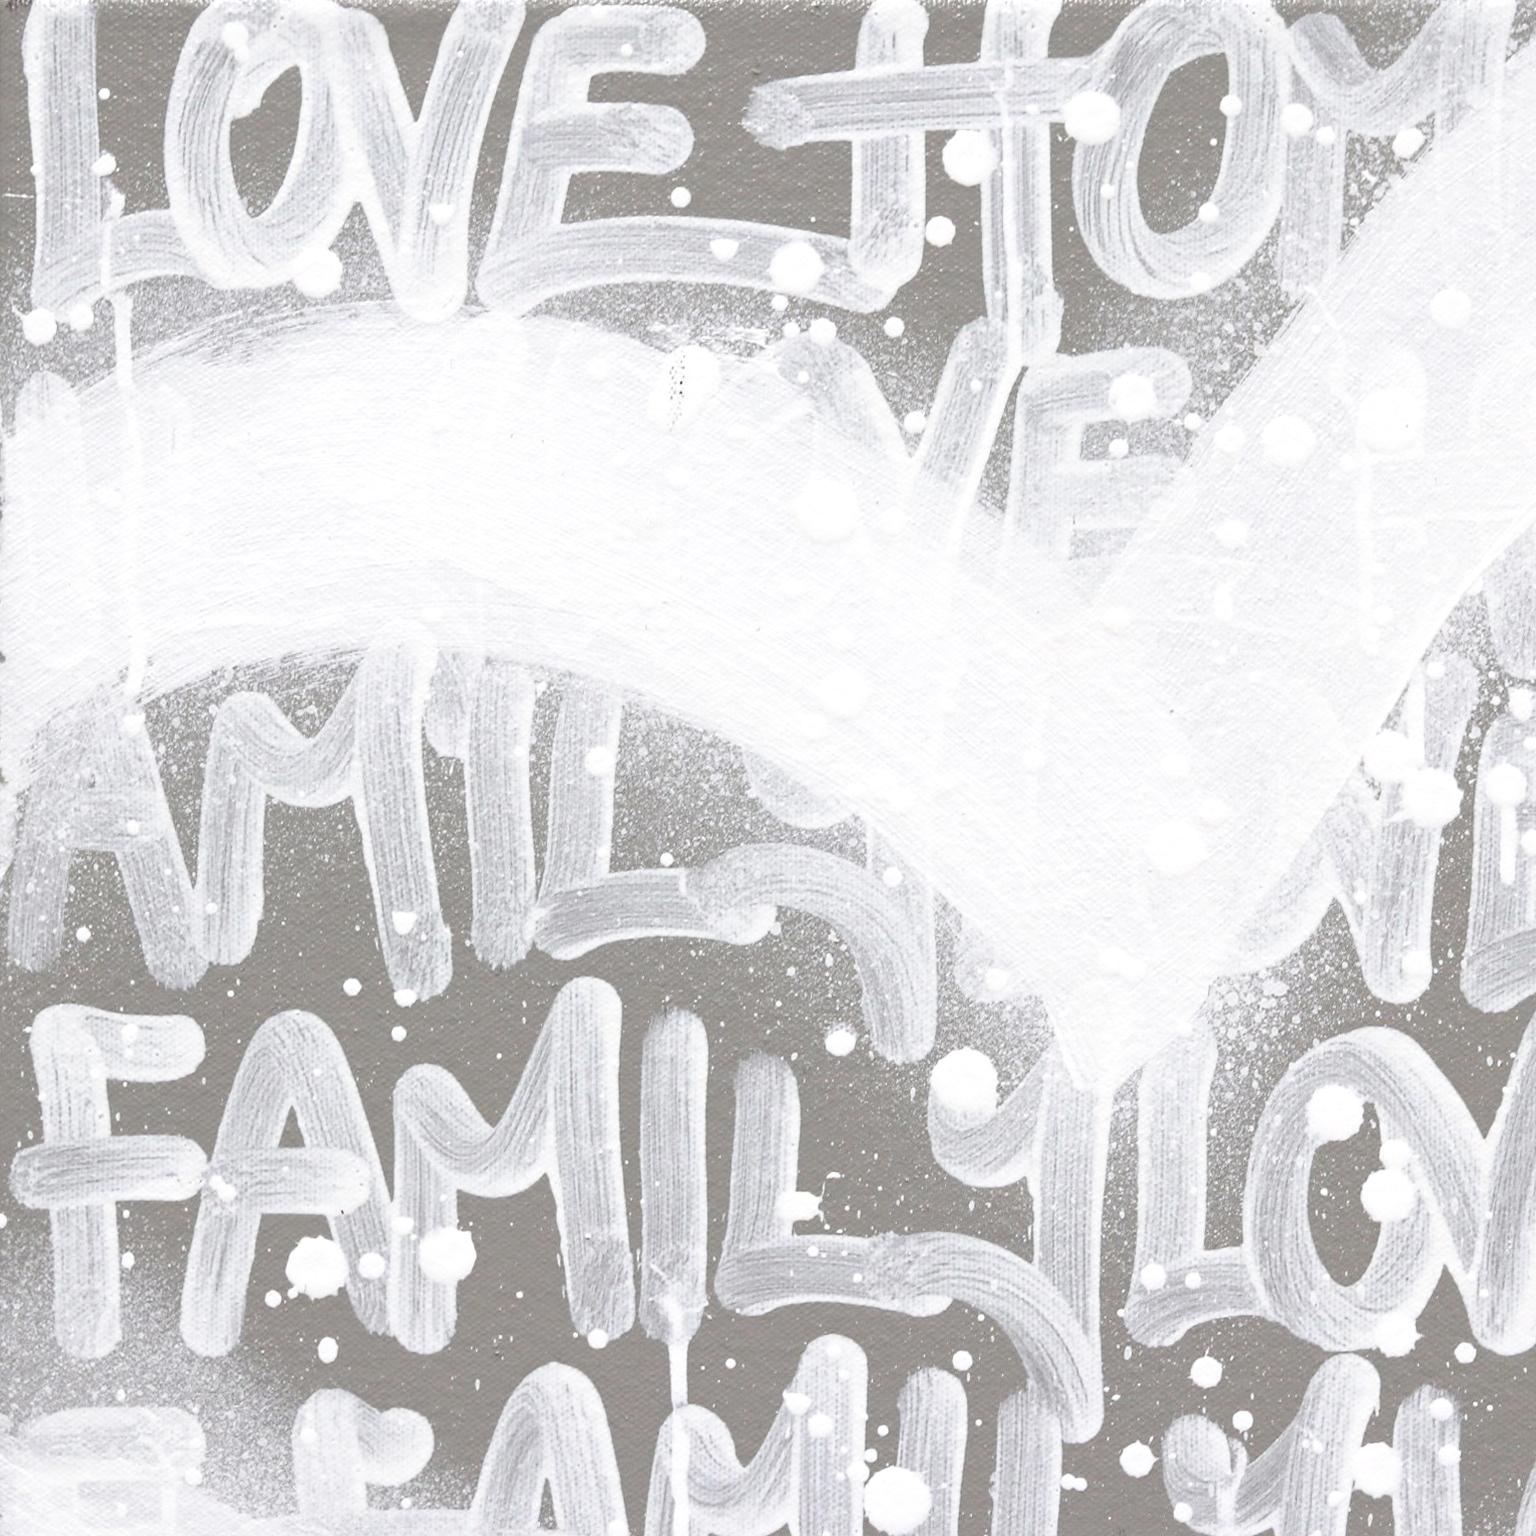 My Family Is My Home - Street Art Painting by Amber Goldhammer